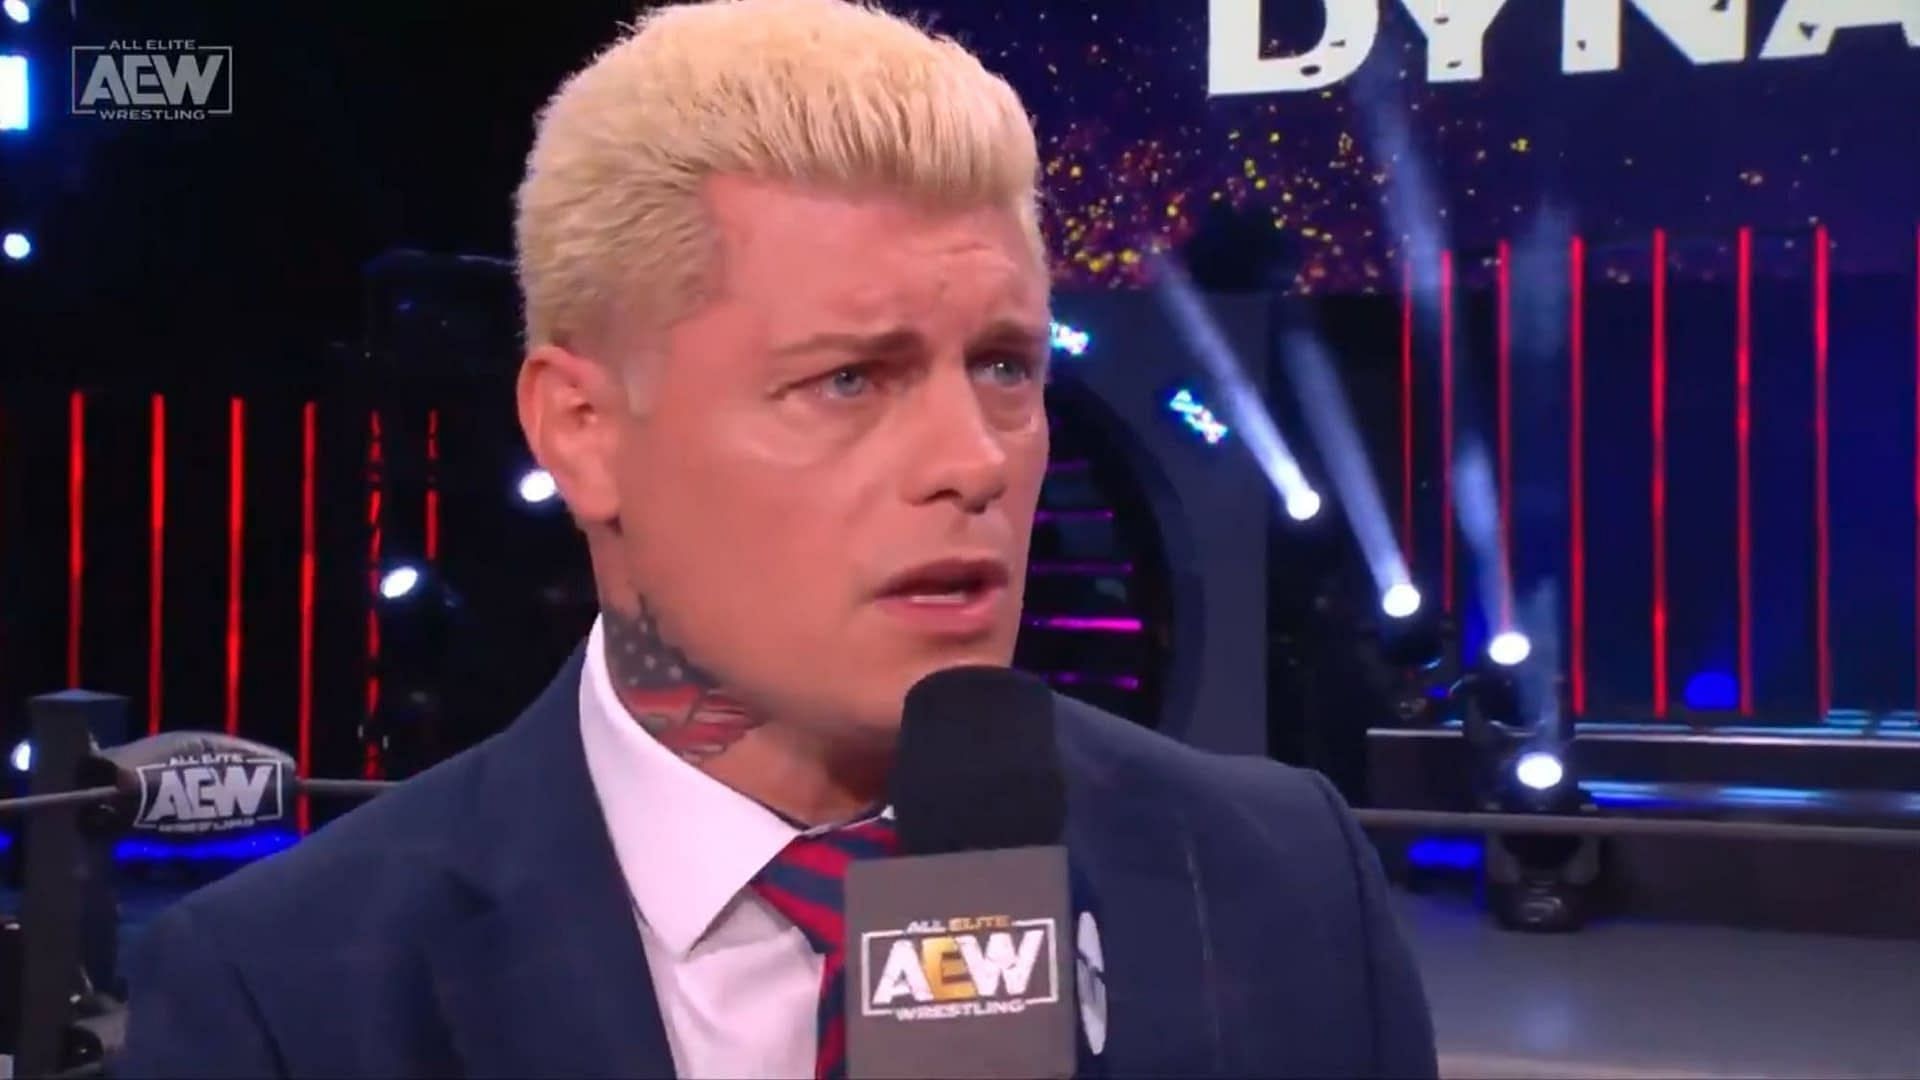 Rhodes during an emotional AEW promo.